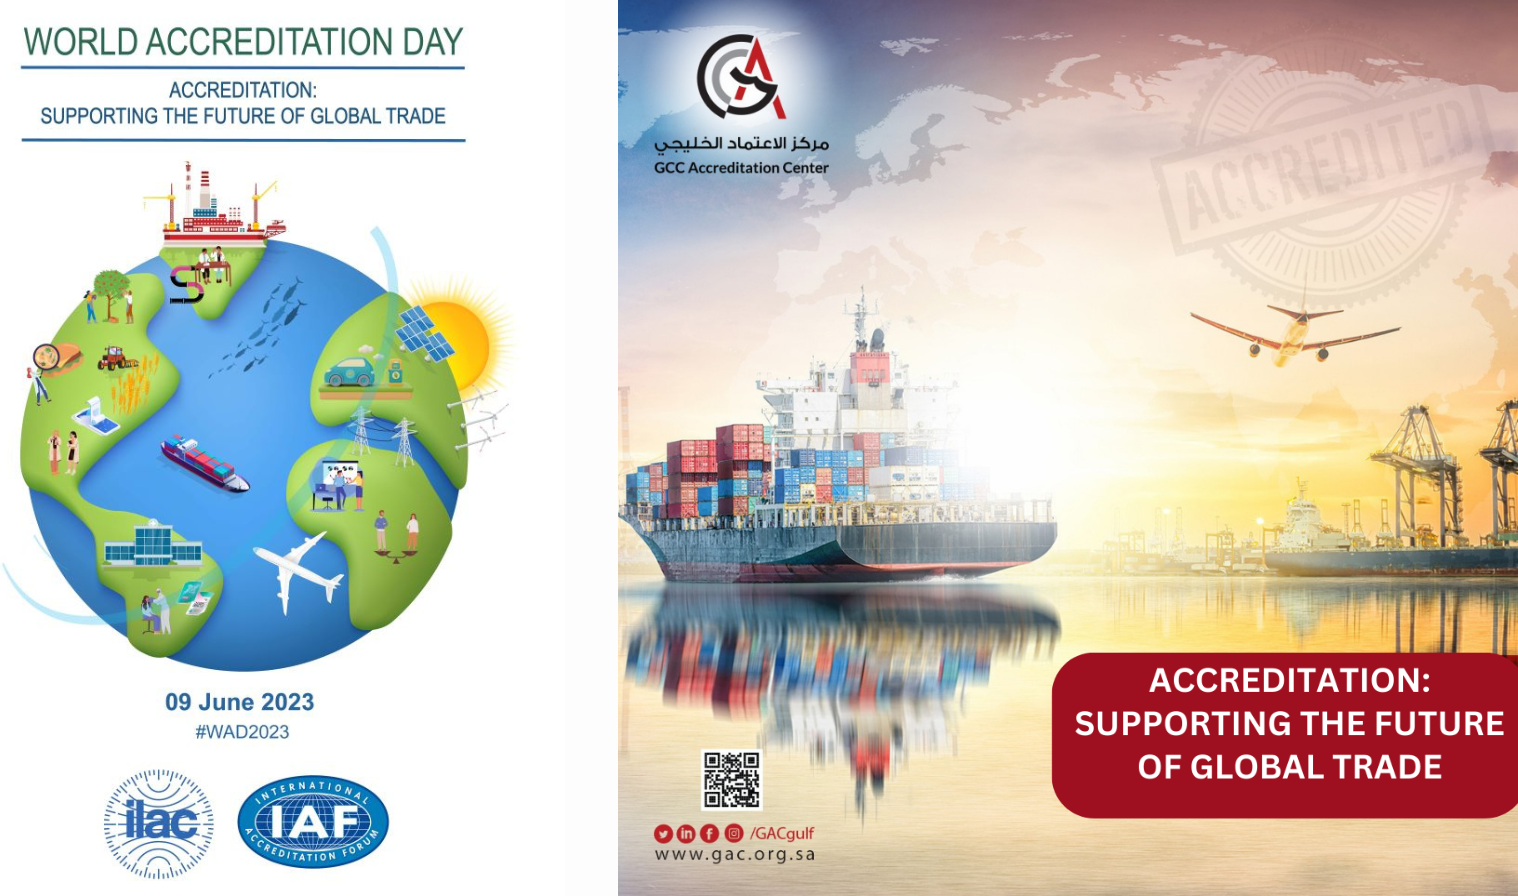 Accreditation Supporting the Future of Global Trade WAD2023